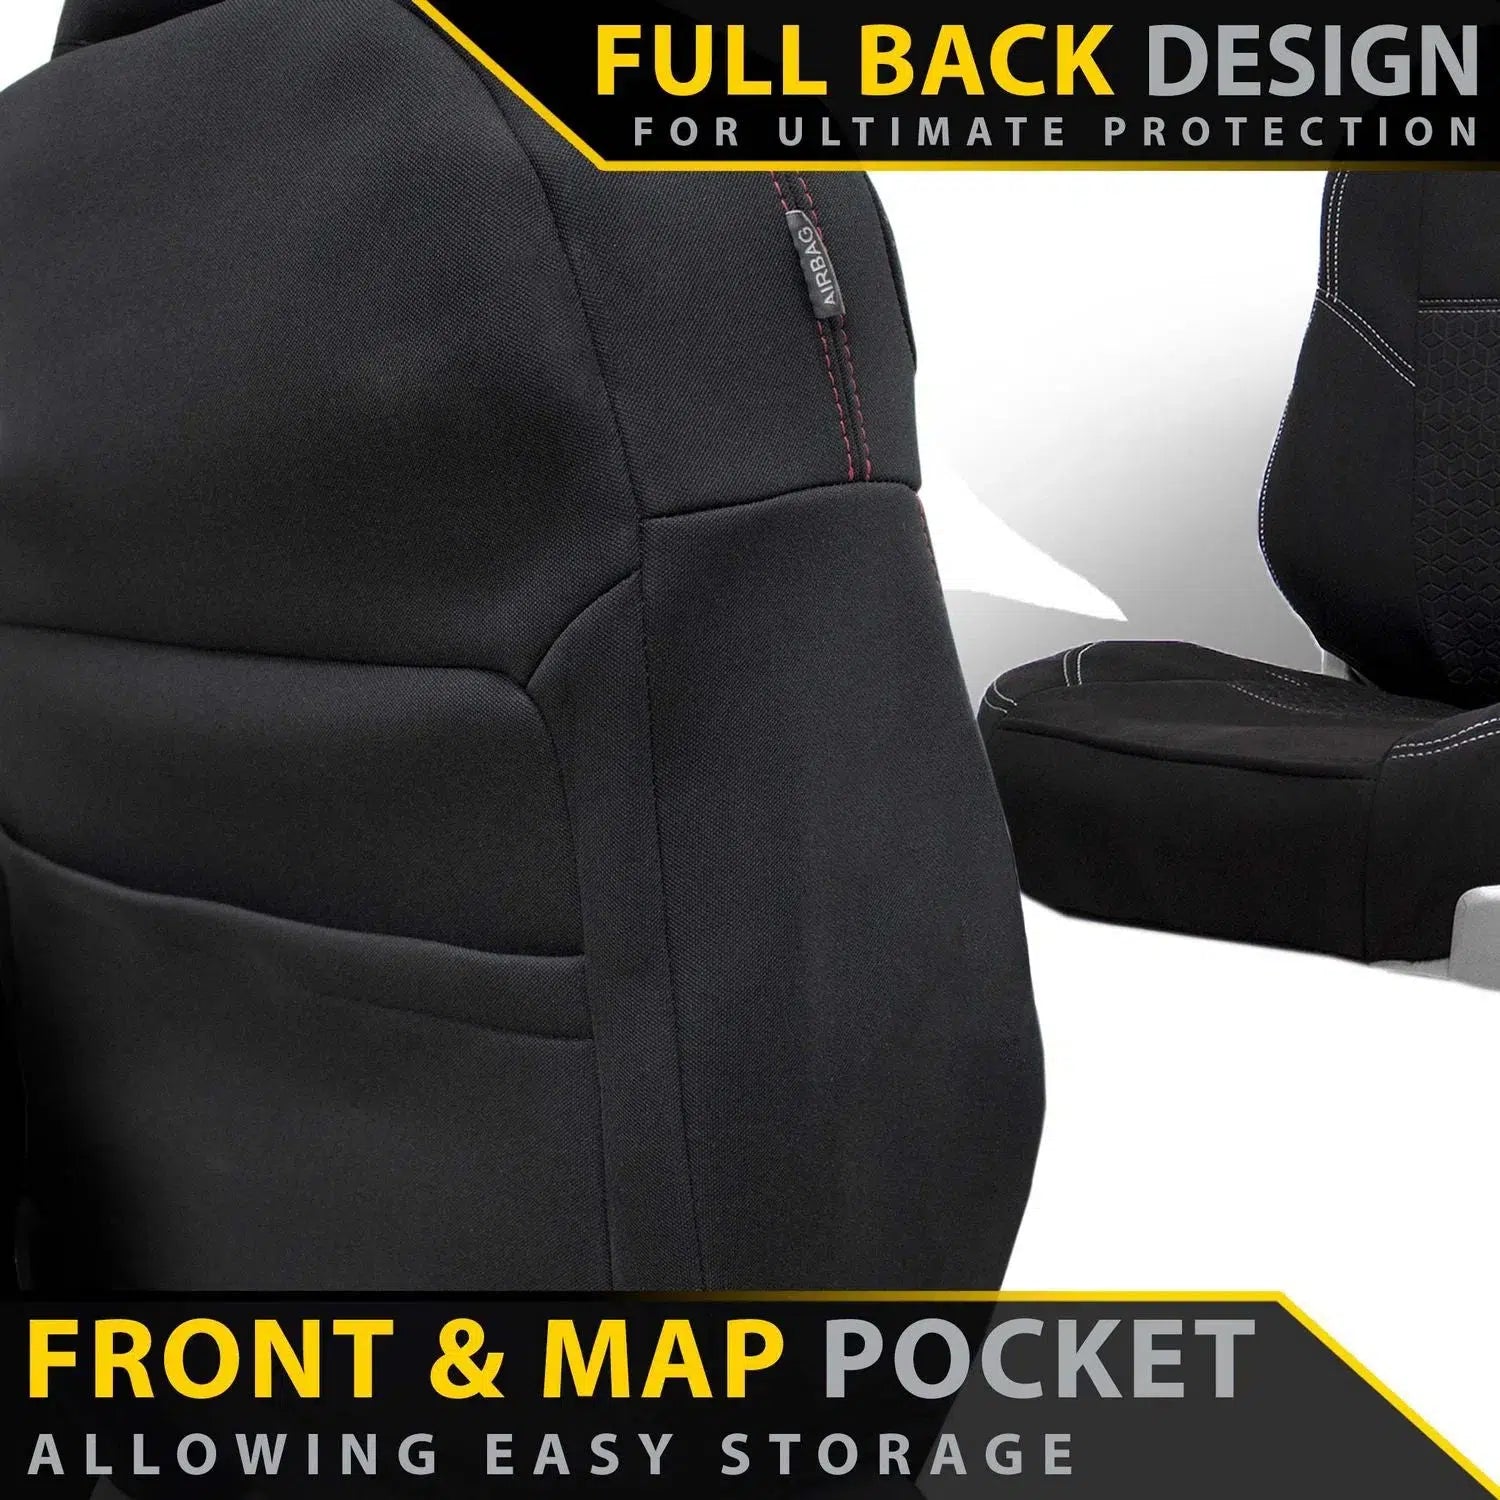 Toyota HiLux 8th Gen SR Premium Neoprene 2x Front Seat Covers (Available)